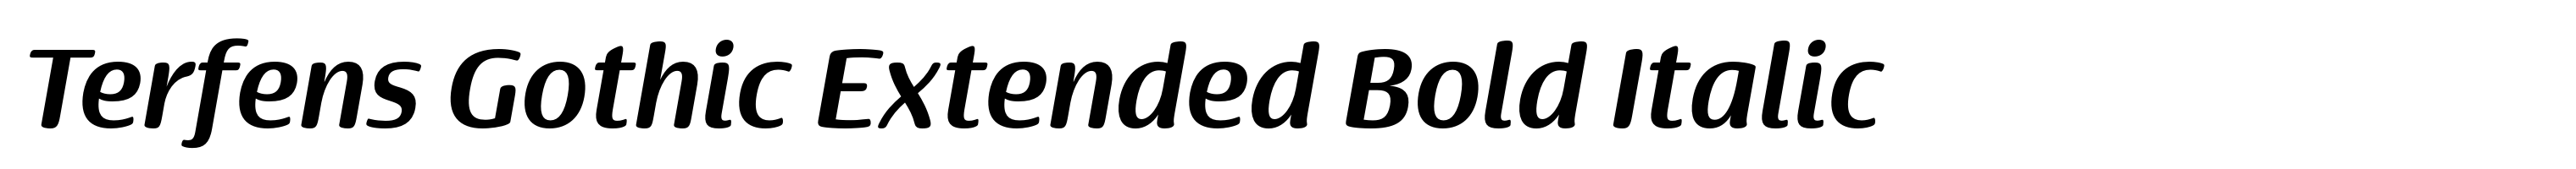 Terfens Gothic Extended Bold Italic